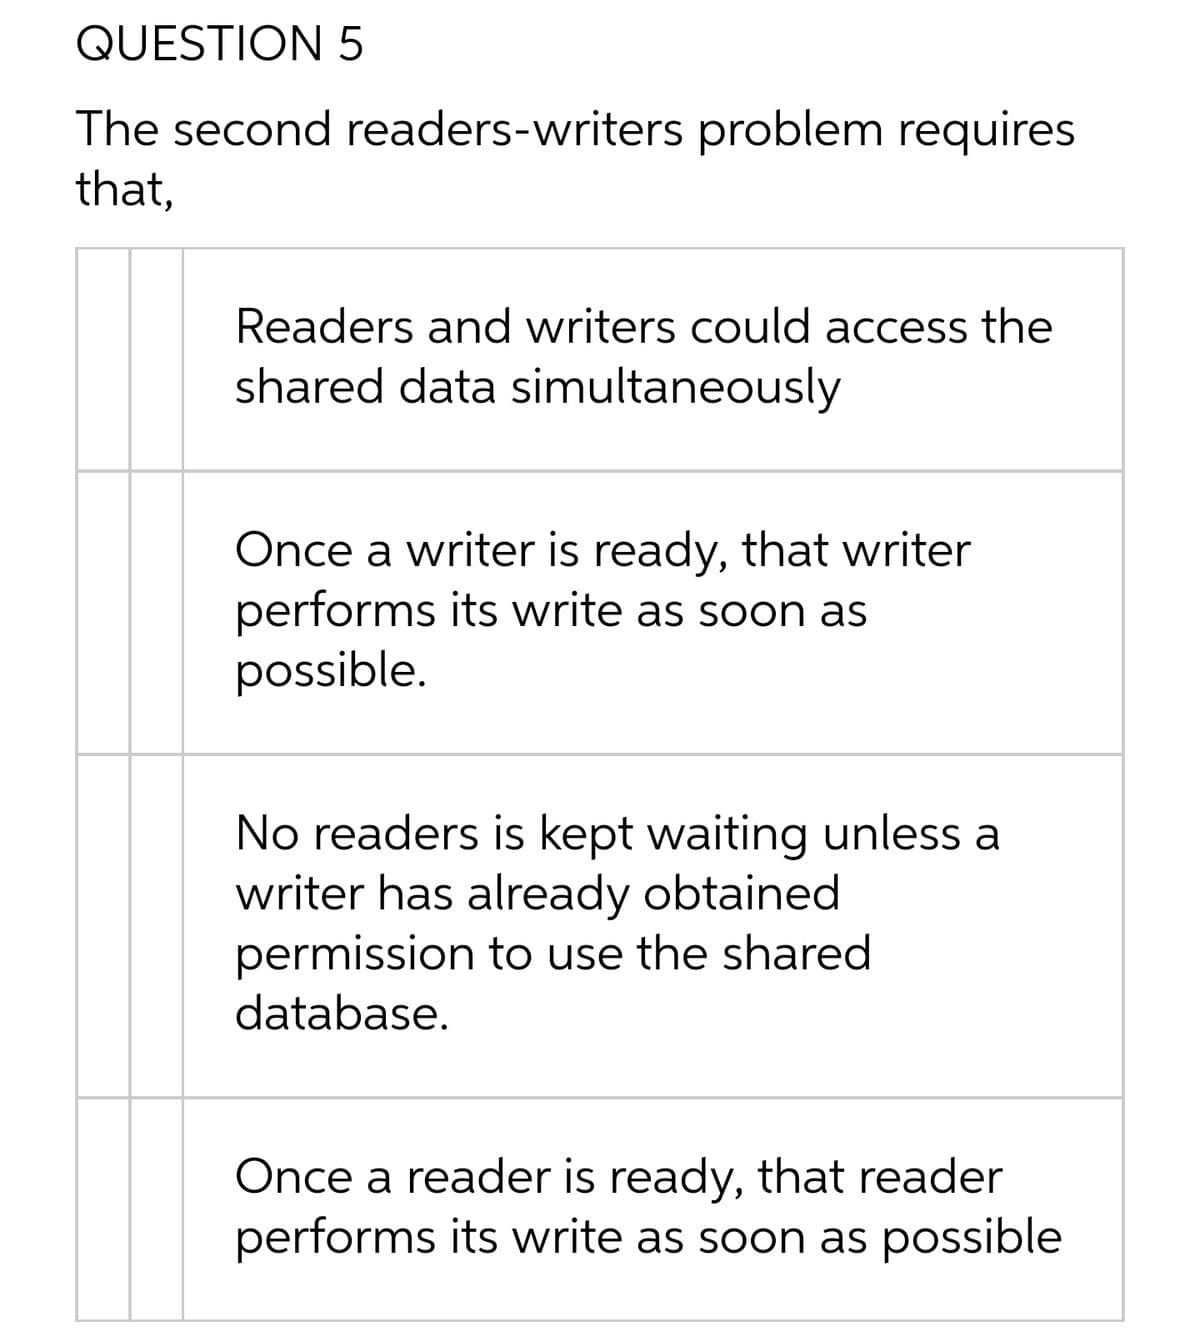 QUESTION 5
The second readers-writers problem requires
that,
Readers and writers could access the
shared data simultaneously
Once a writer is ready, that writer
performs its write as soon as
possible.
No readers is kept waiting unless a
writer has already obtained
permission to use the shared
database.
Once a reader is ready, that reader
performs its write as soon as possible
